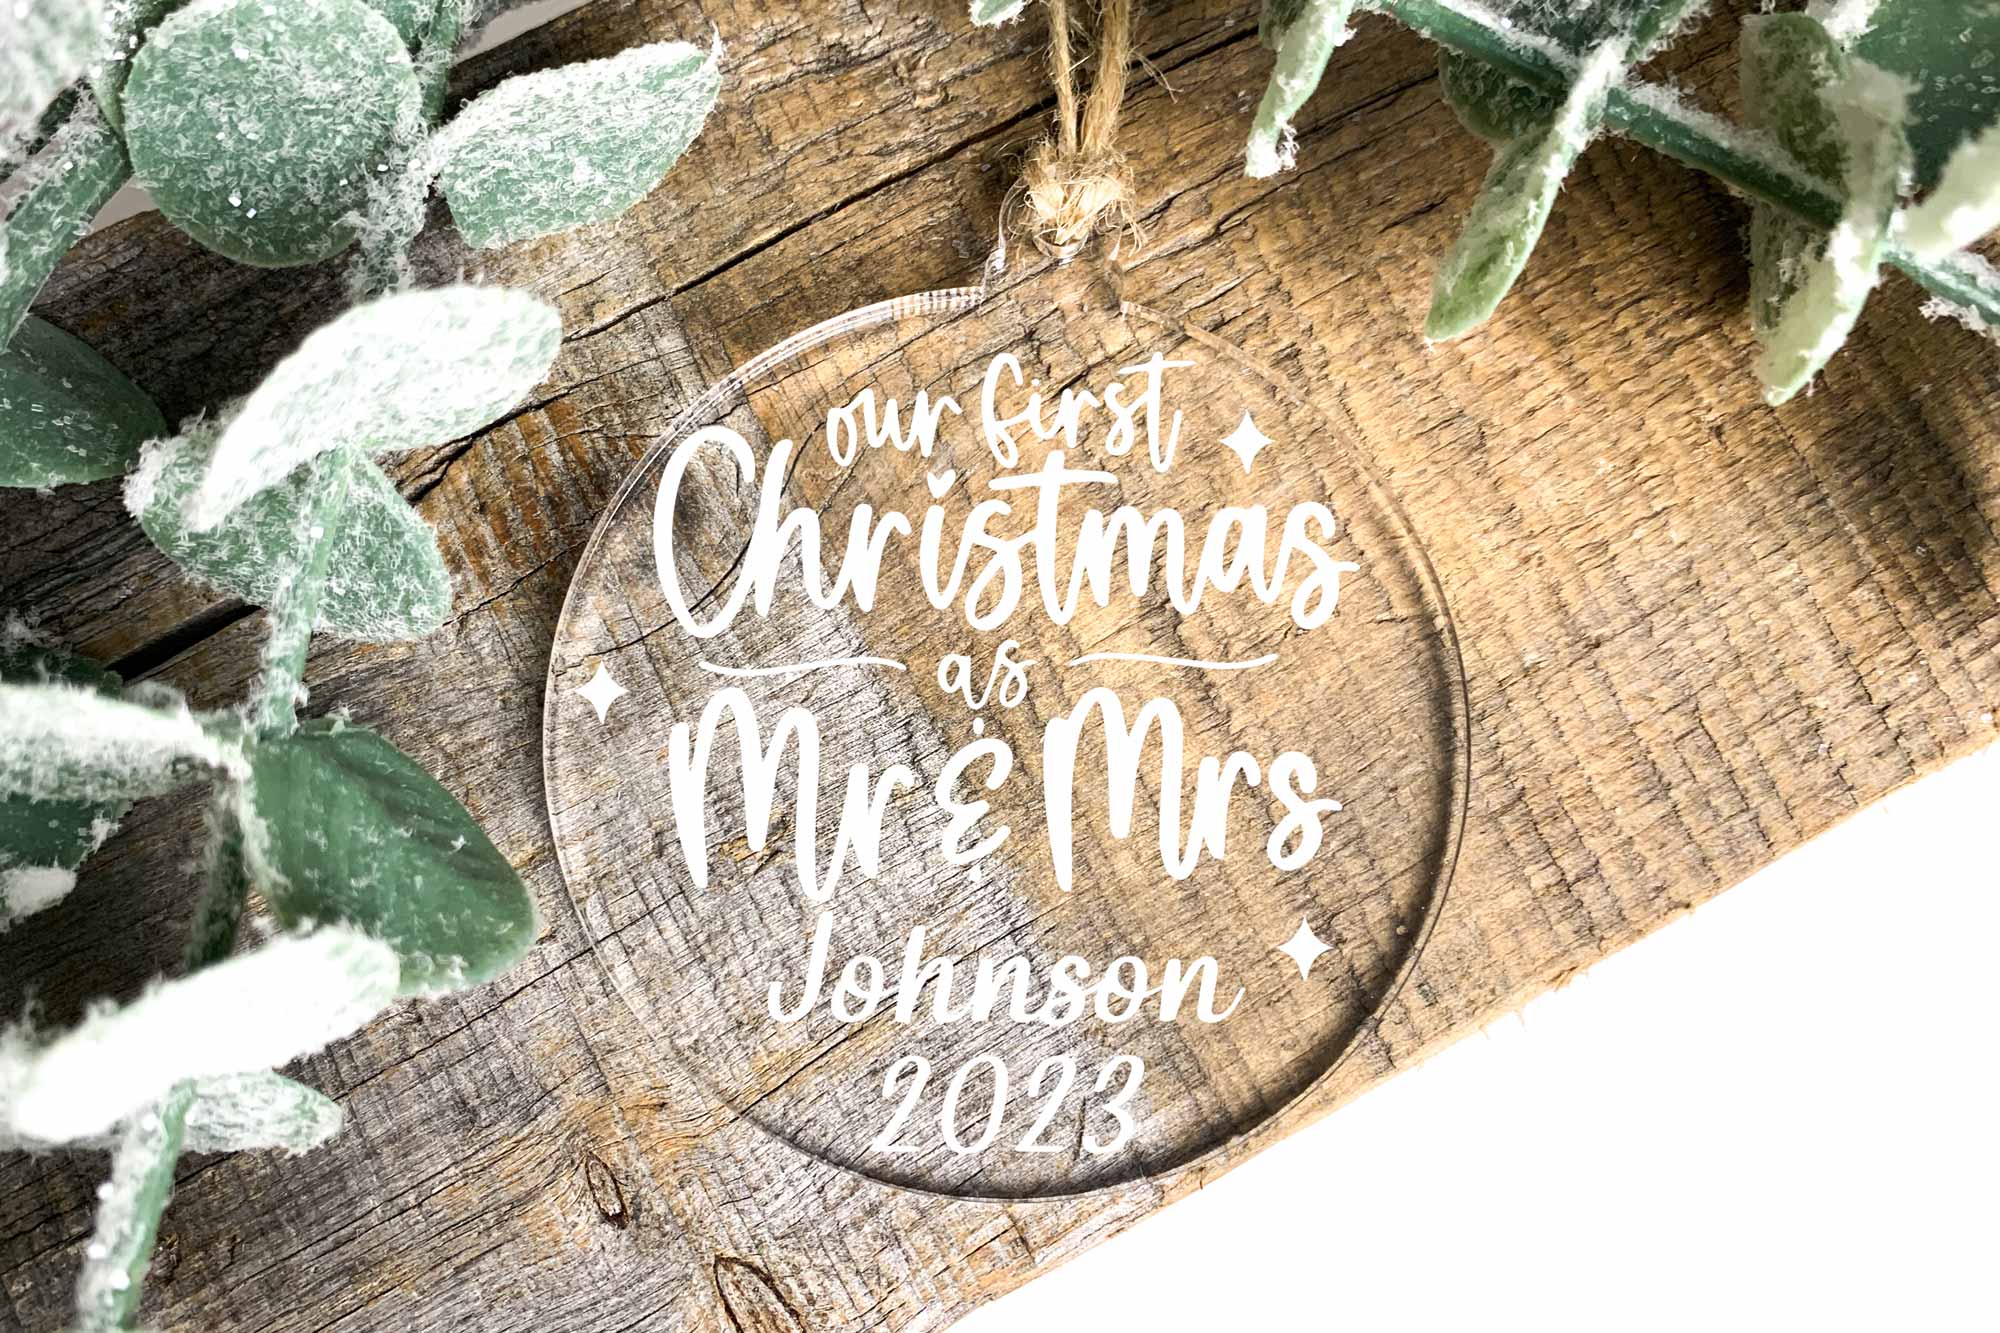 First Christmas as Mr & Mrs Decoration